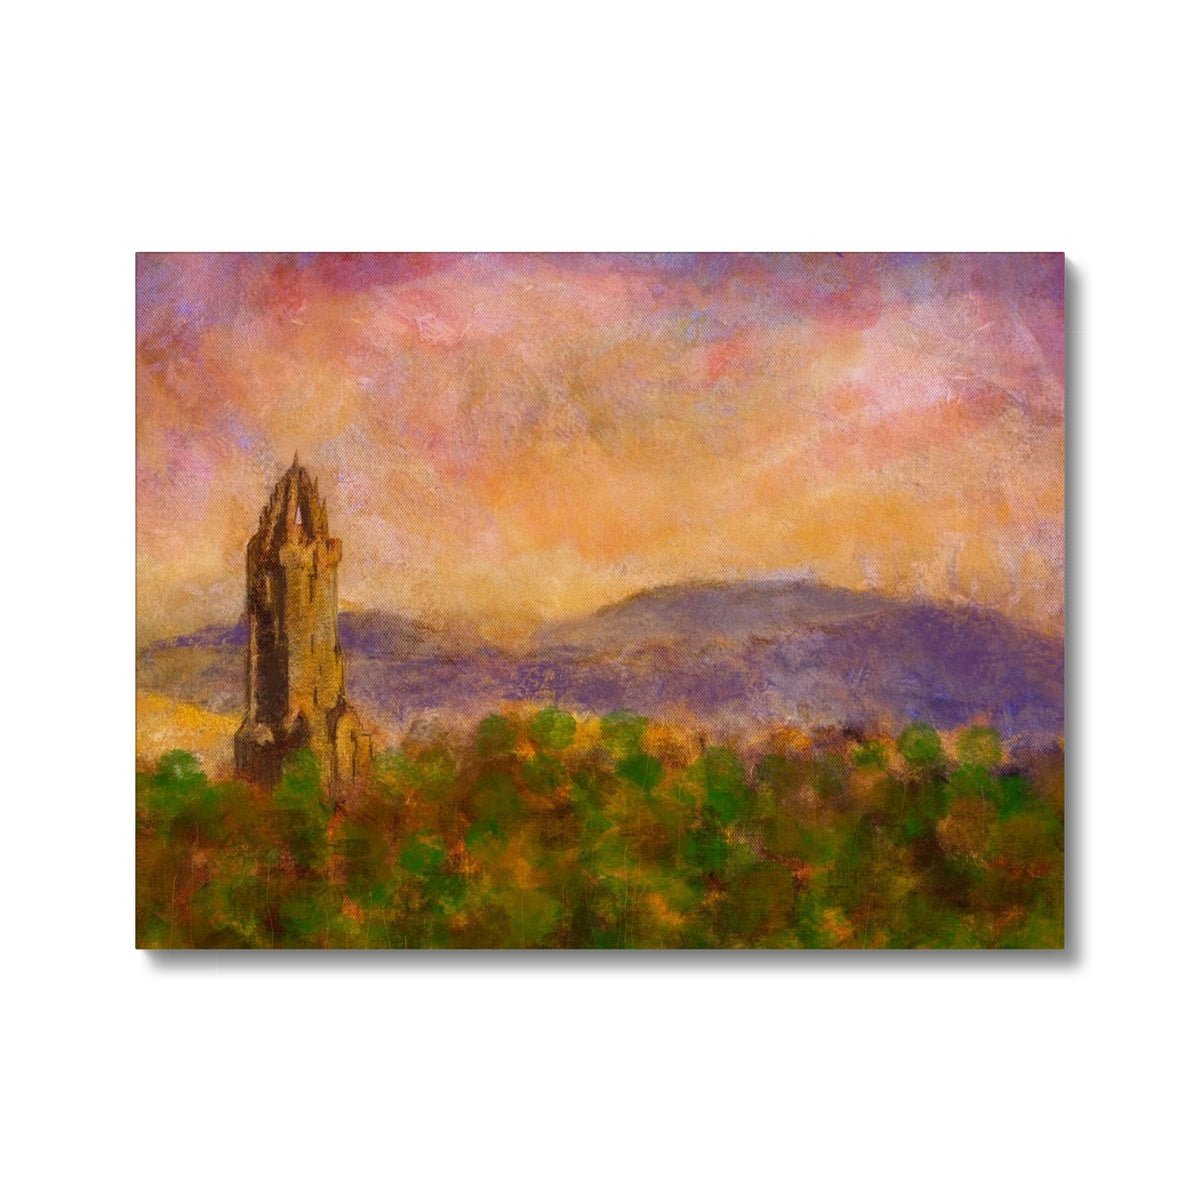 Wallace Monument Dusk Painting | Canvas From Scotland-Contemporary Stretched Canvas Prints-Historic & Iconic Scotland Art Gallery-24"x18"-Paintings, Prints, Homeware, Art Gifts From Scotland By Scottish Artist Kevin Hunter